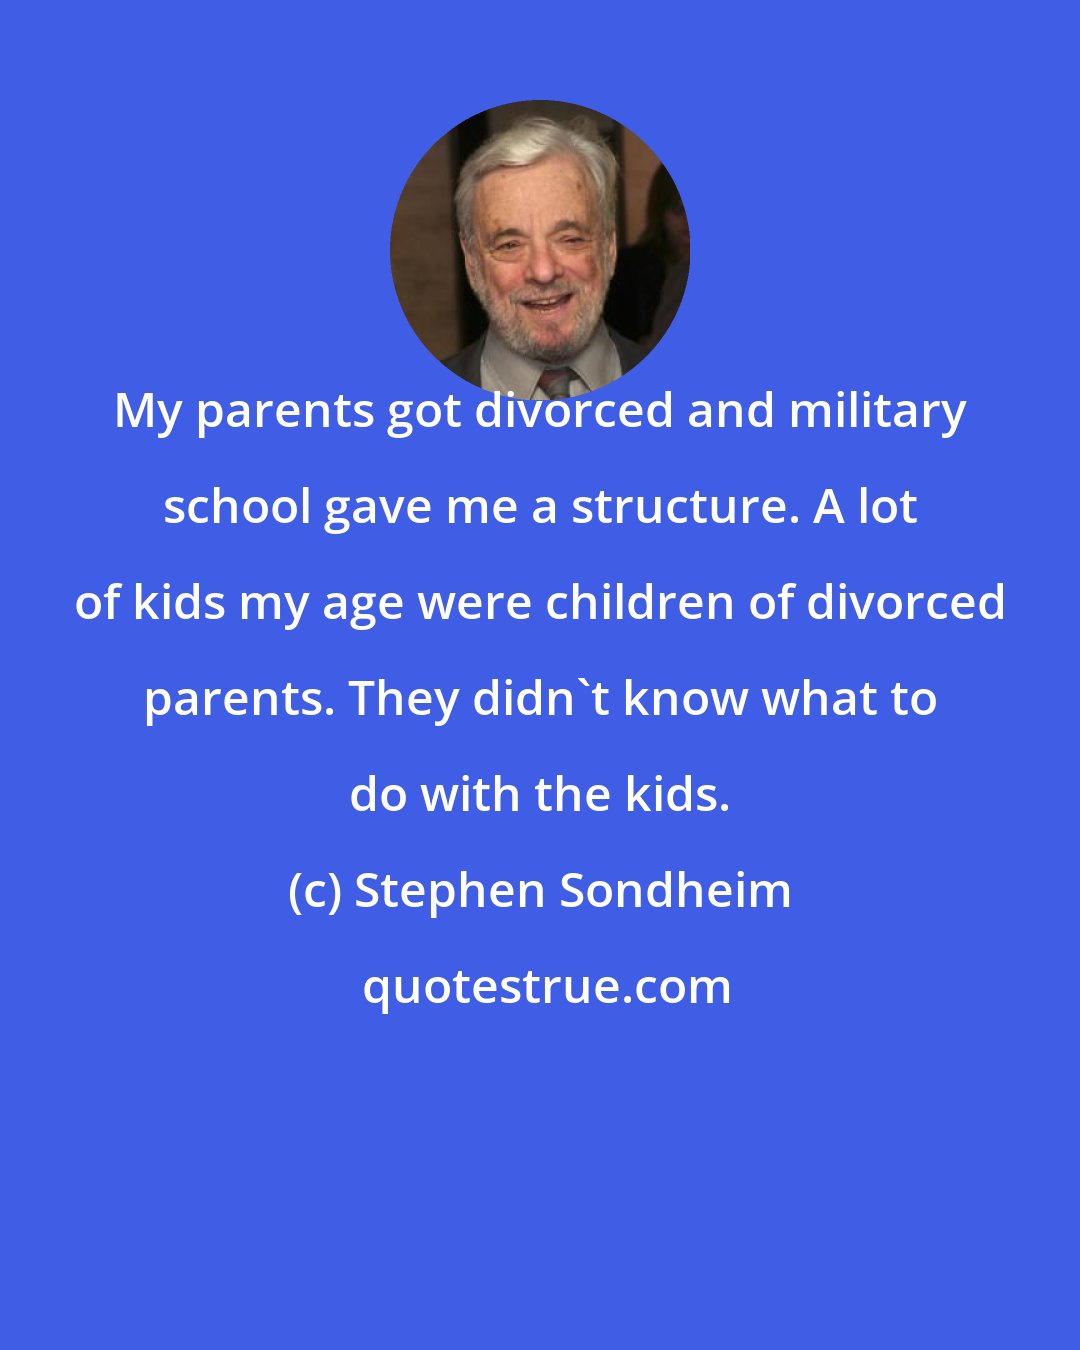 Stephen Sondheim: My parents got divorced and military school gave me a structure. A lot of kids my age were children of divorced parents. They didn't know what to do with the kids.